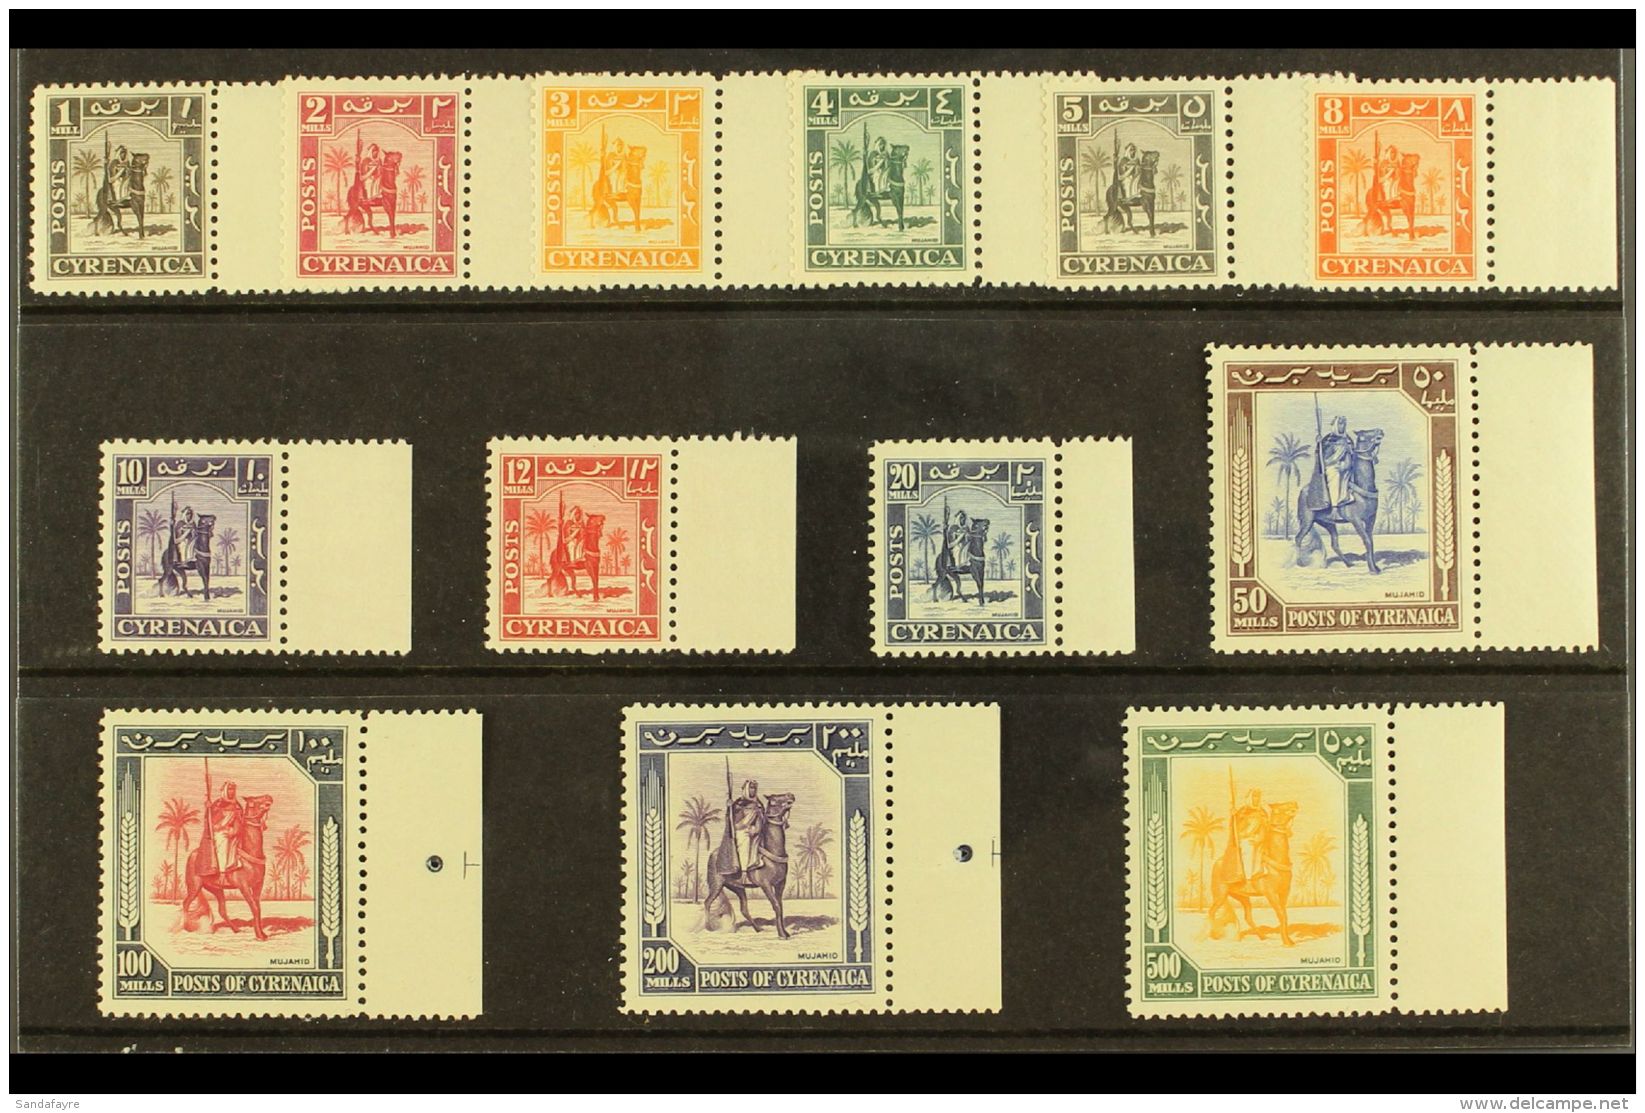 CYRENAICA 1950 "Mounted Warrior" Definitives Complete Set, SG 136/48, Very Fine Never Hinged Mint Matching... - Italiaans Oost-Afrika